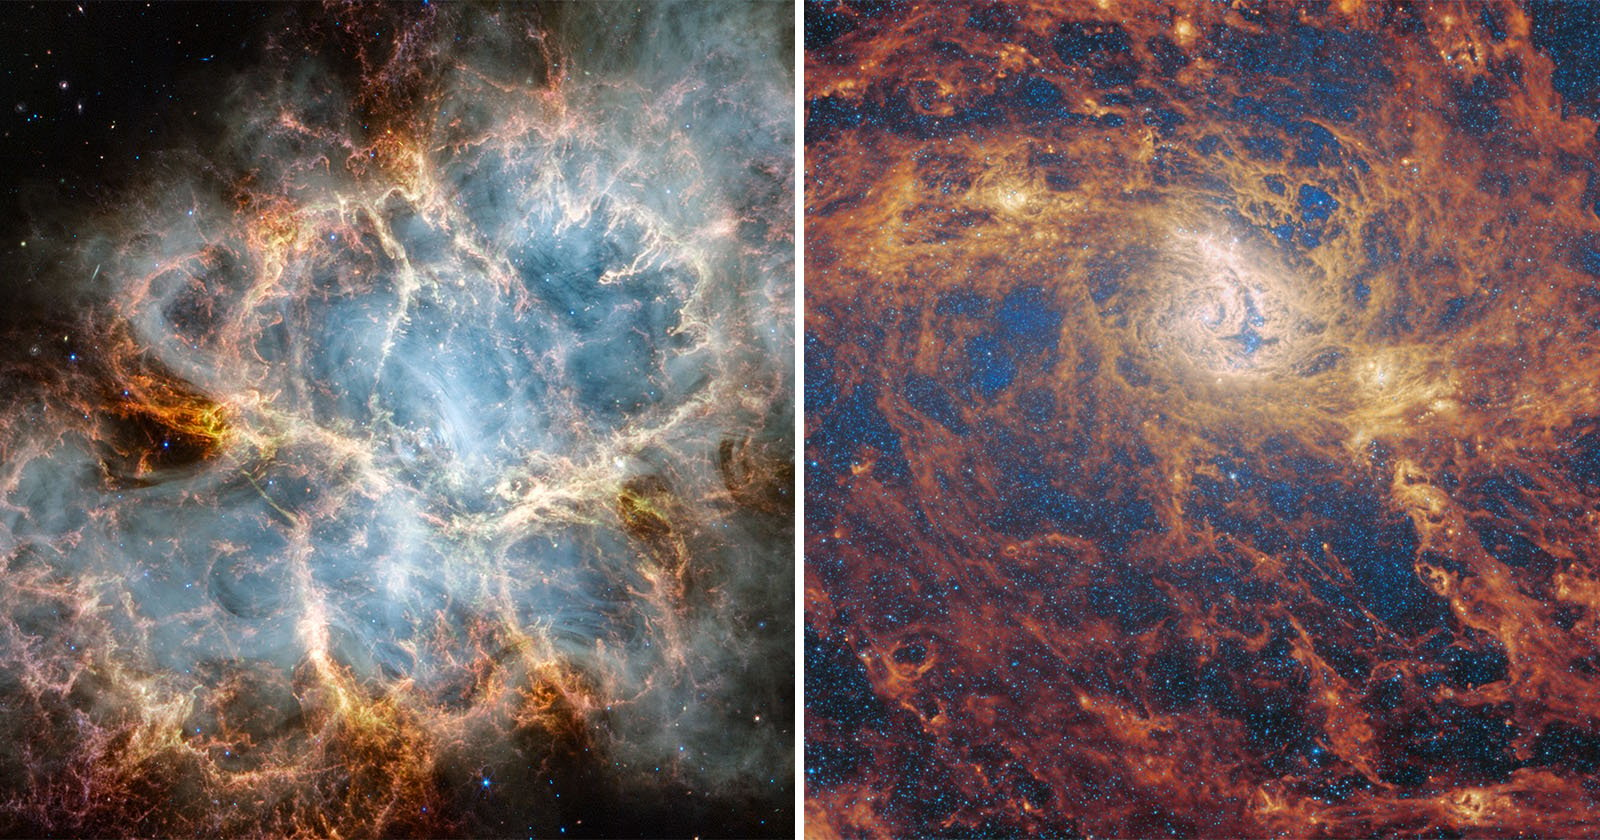 Webbs Spectacular and Beautiful Views of the Crab Nebula and M83